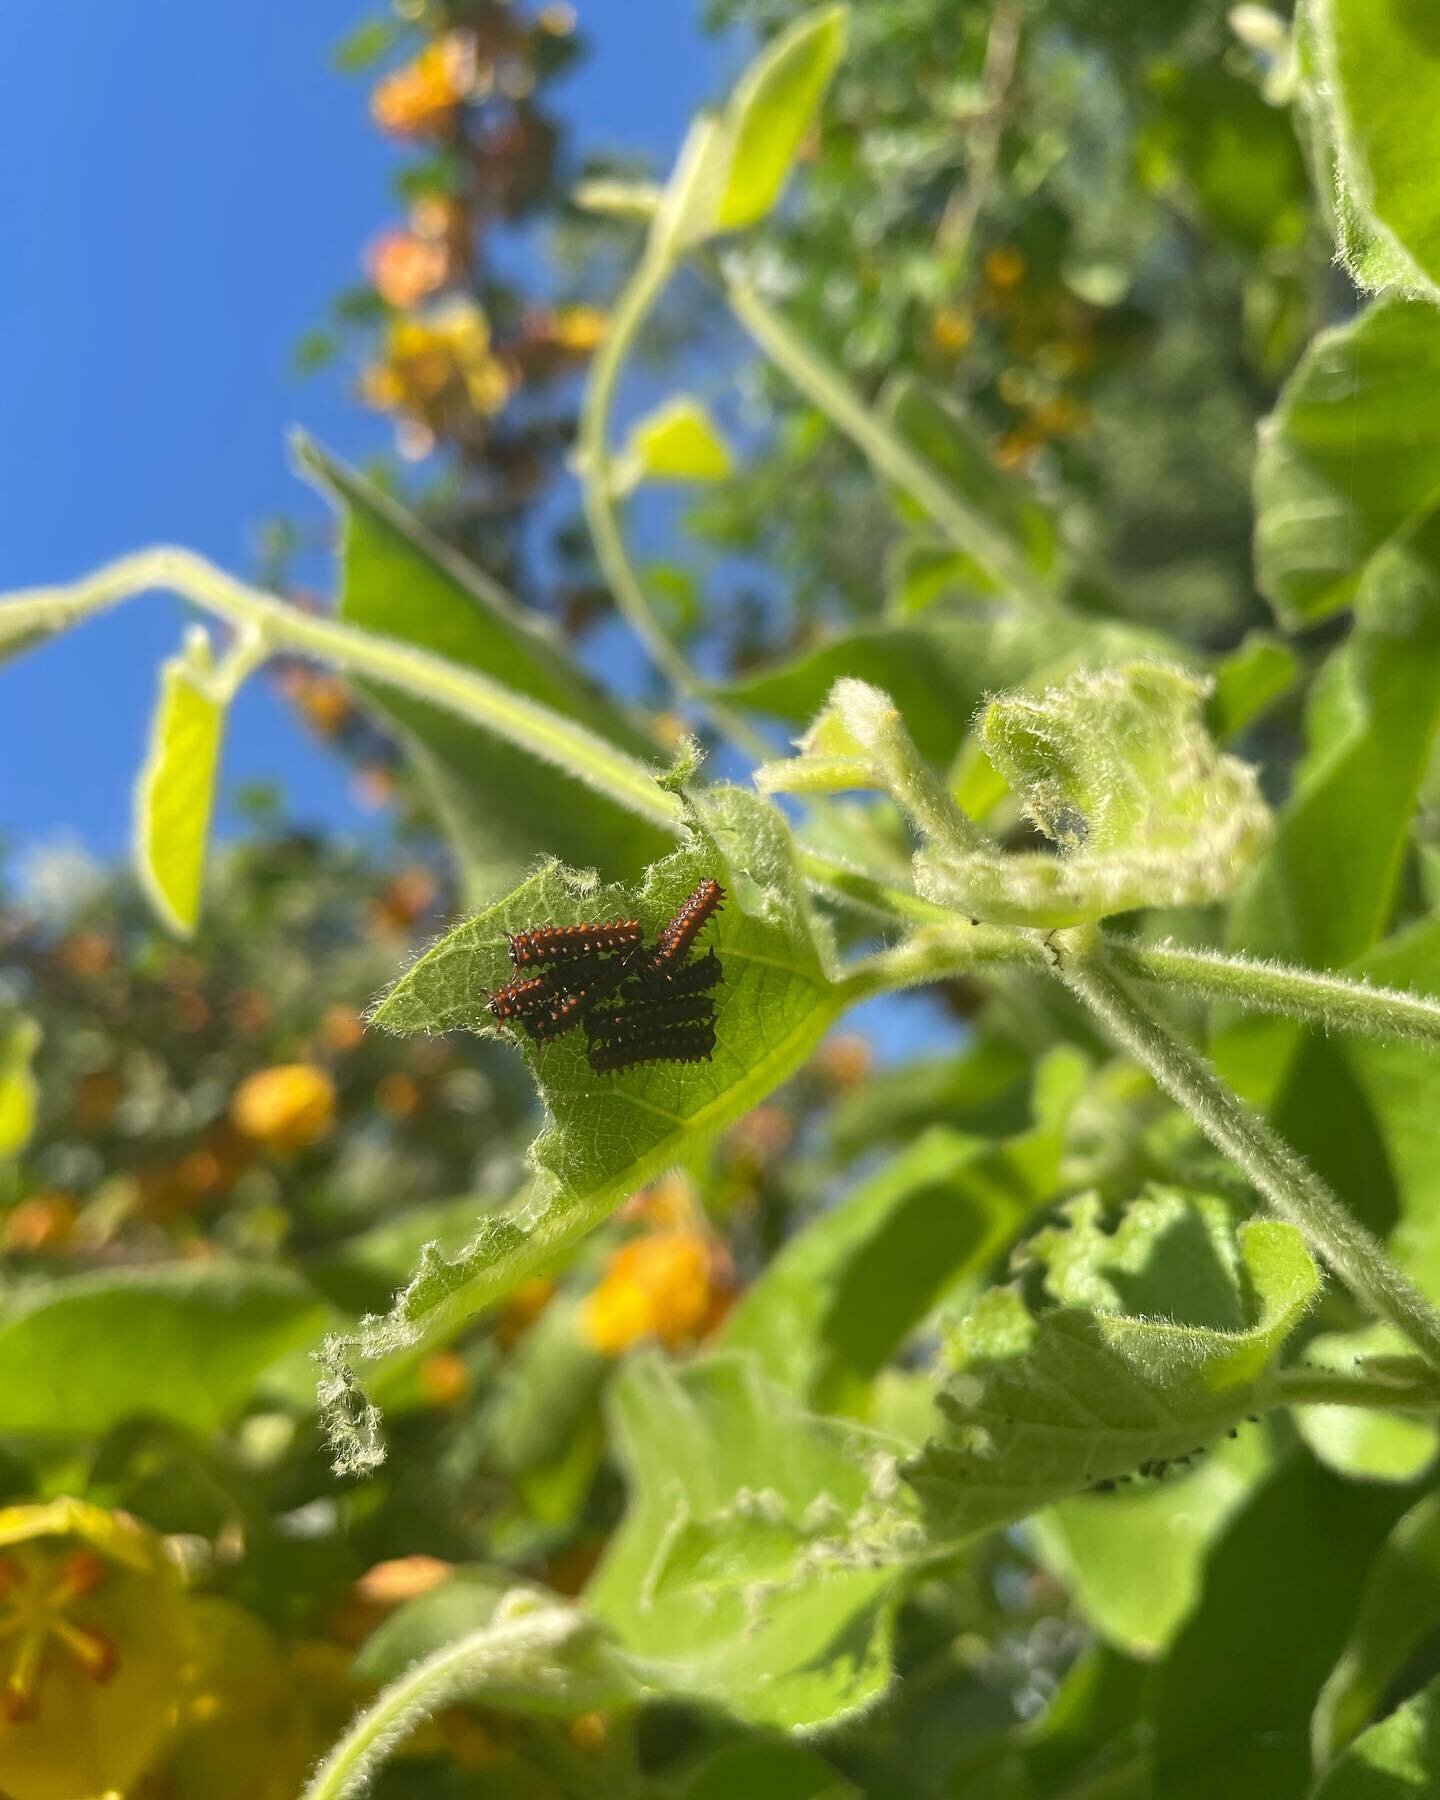 Pipevine swallowtail update! 3 weeks later we have tiny caterpillars munching on the Pipevine.